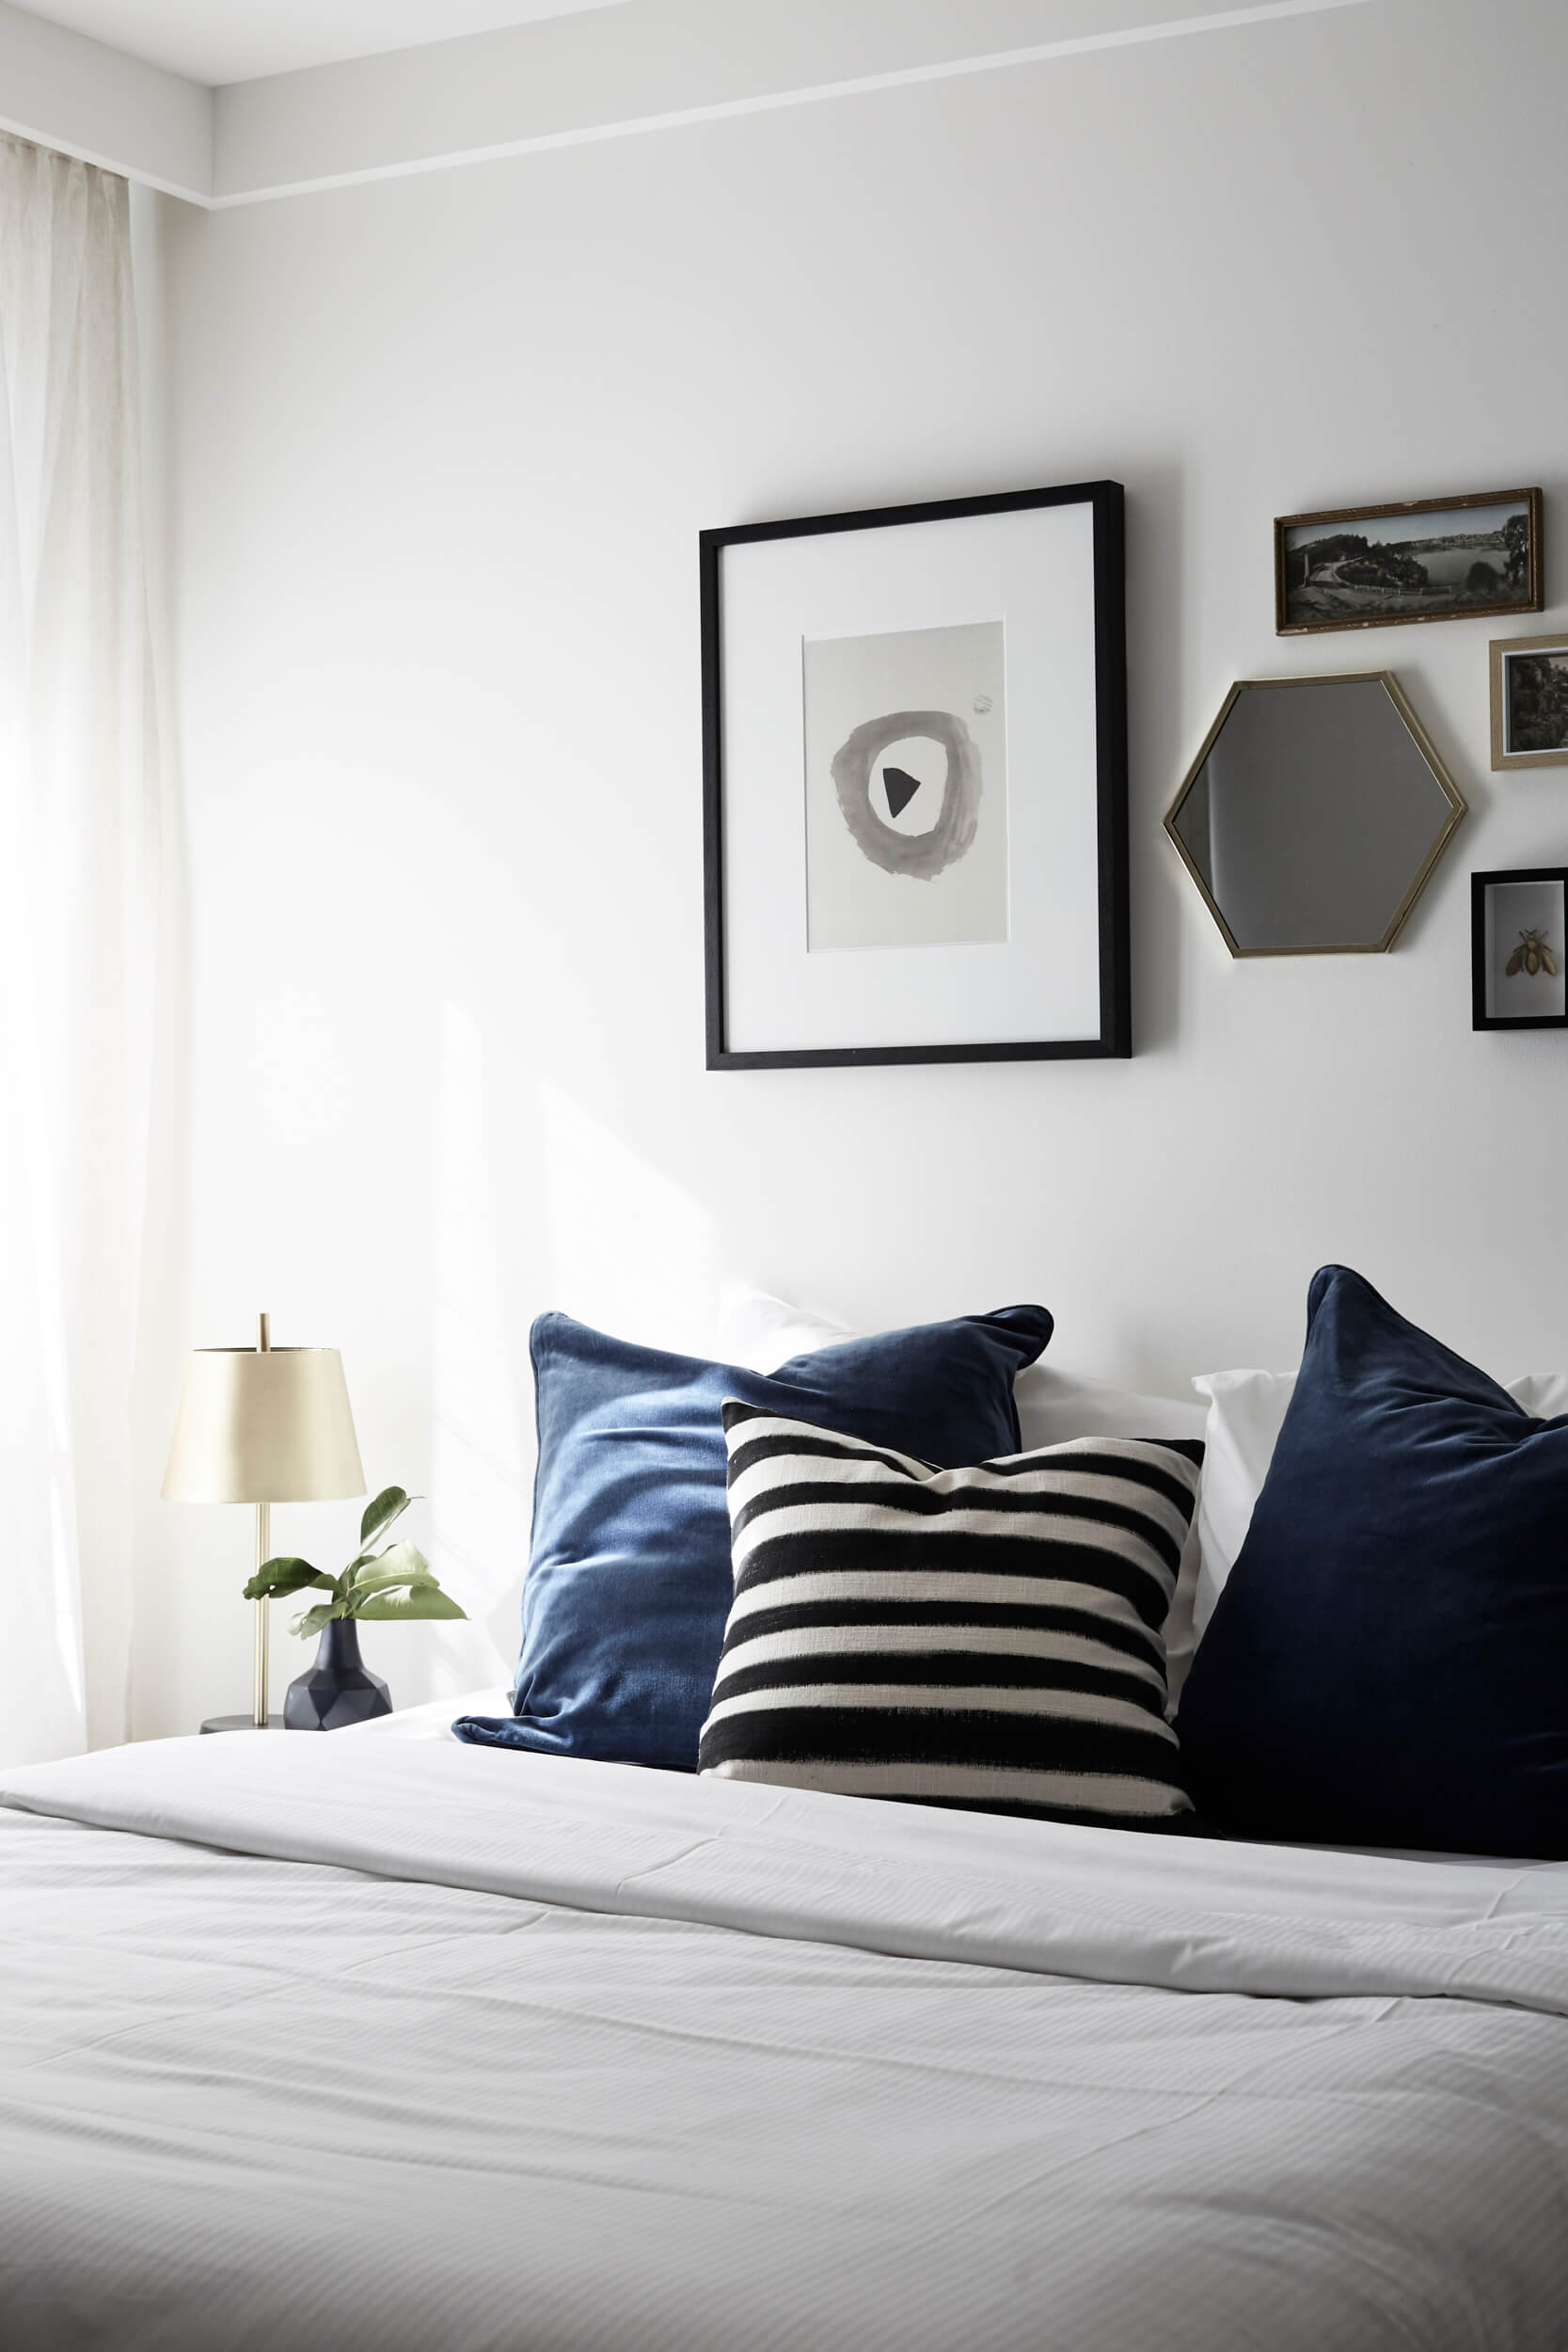 Bed at the Bower Suites, The Bower Byron Bay hotel with blue velvet cushions and curated wall art above